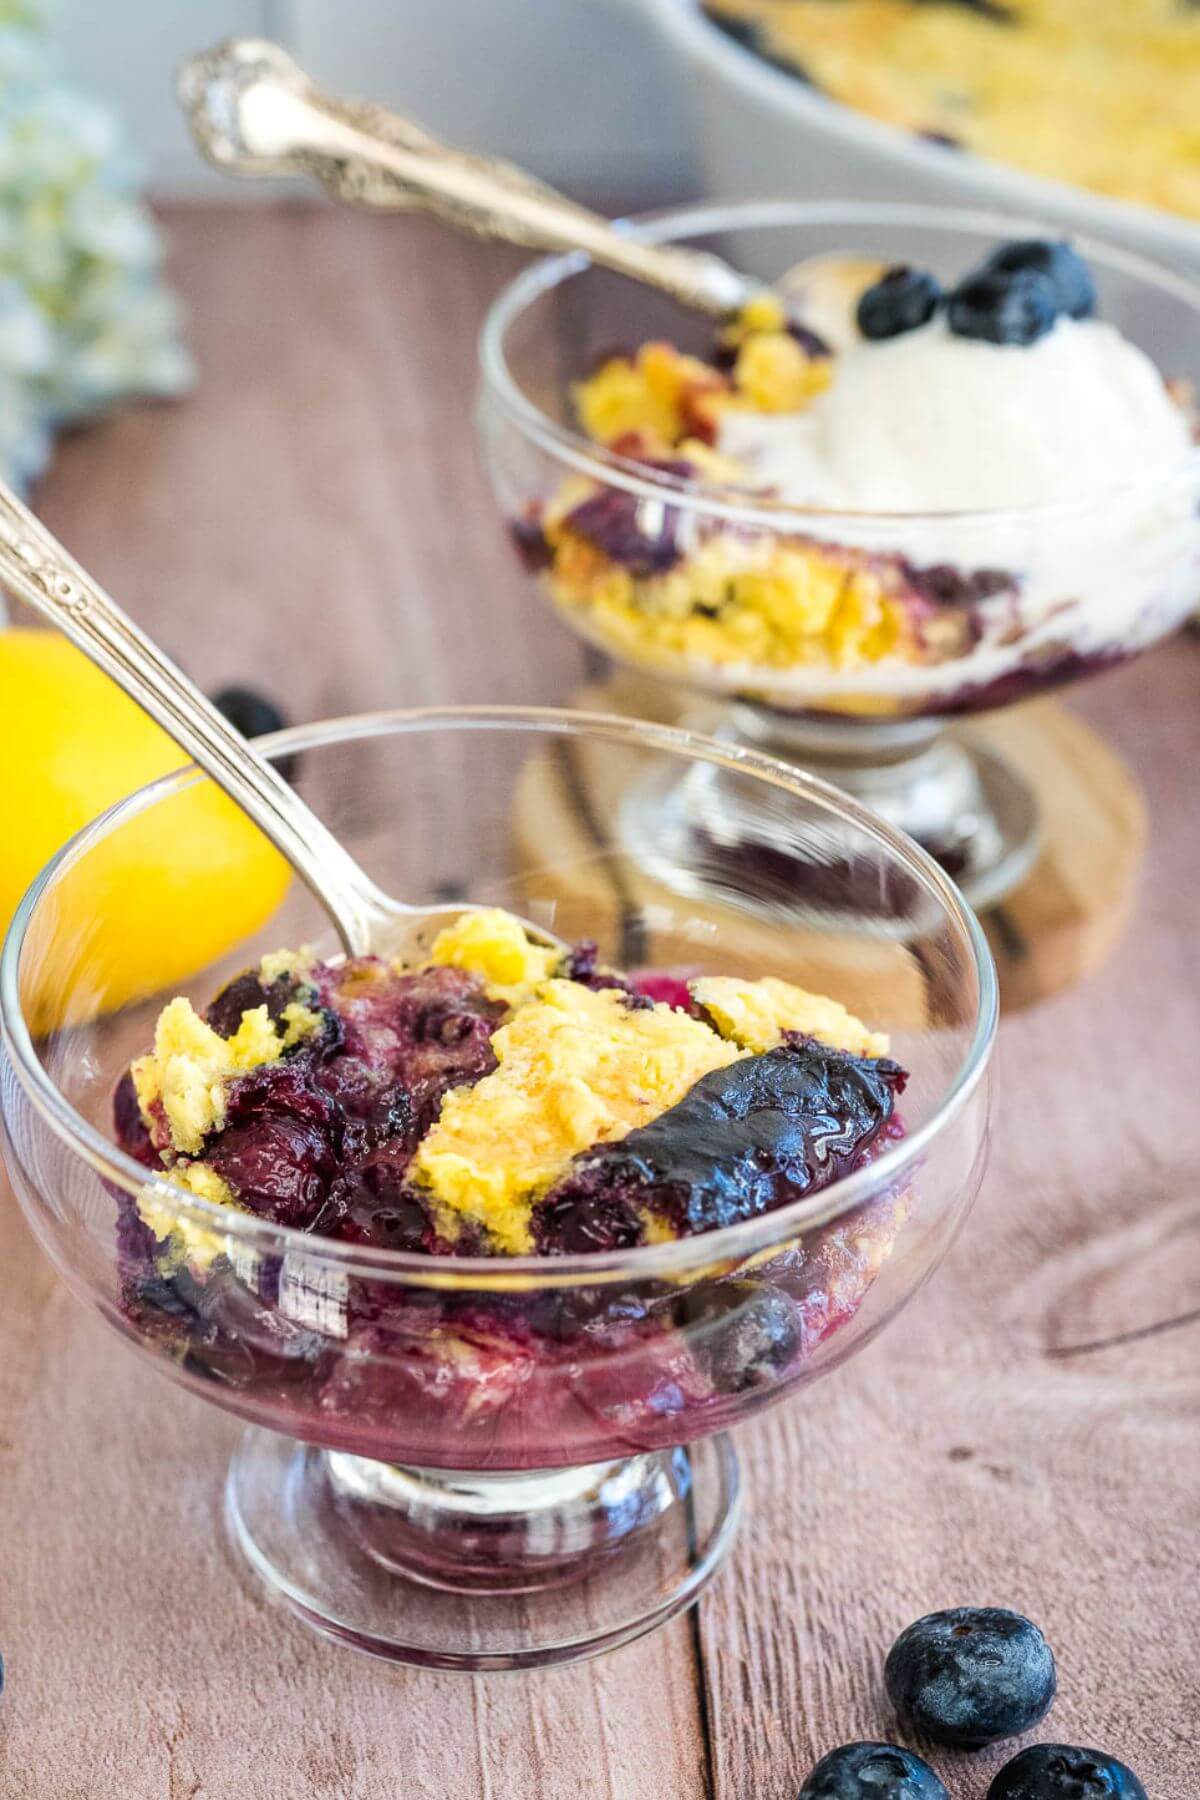 Two serving bowls are filled with yellow cake with blueberries, and one has ice cream on top.